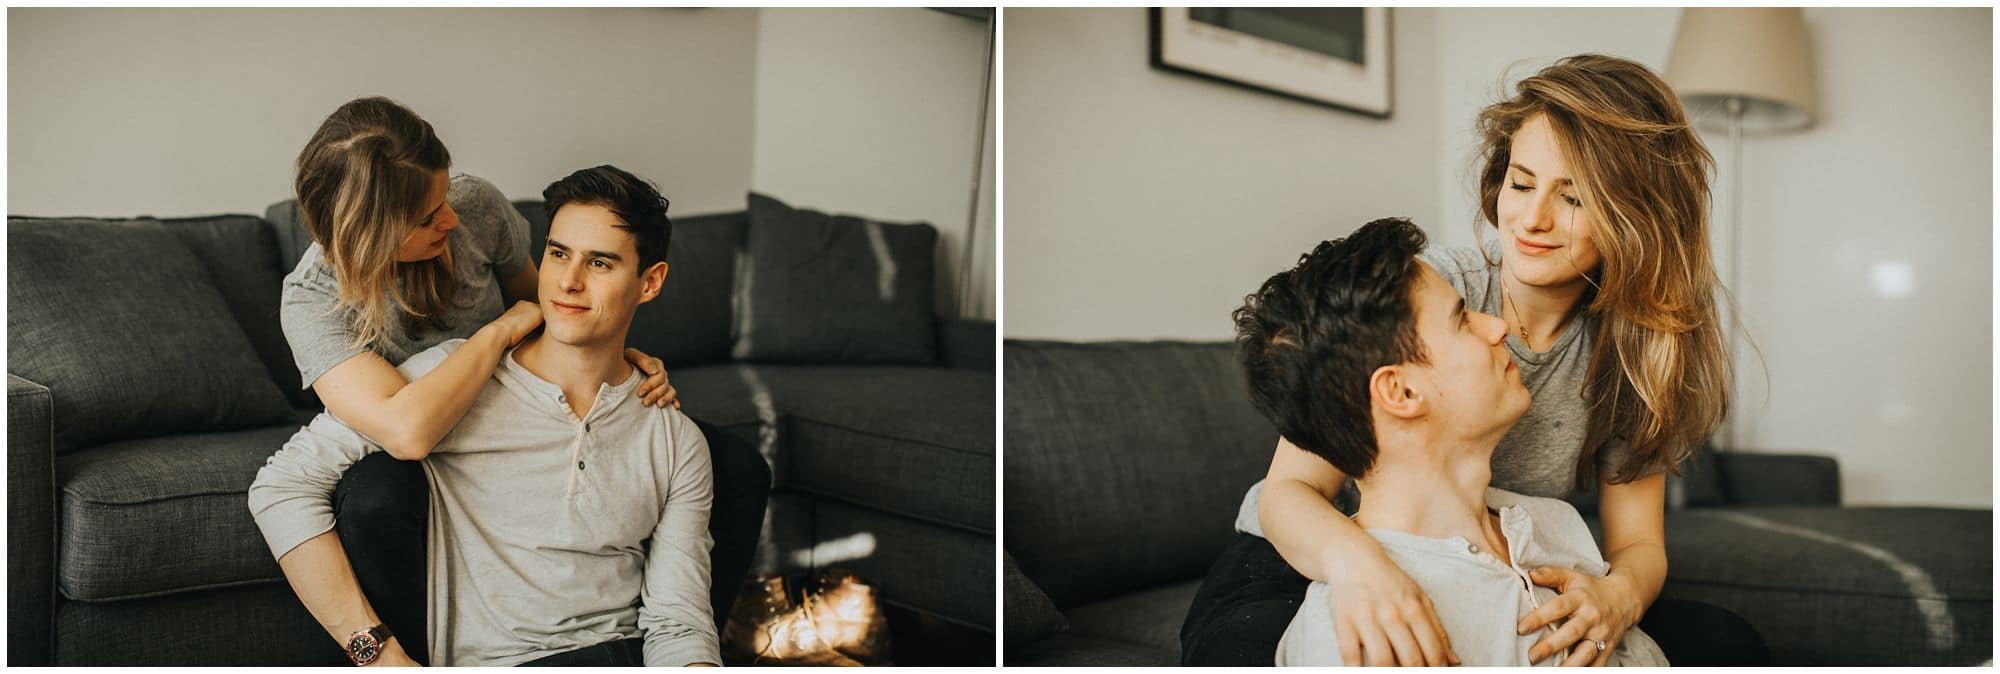 intimate home engagement session in philadelphia